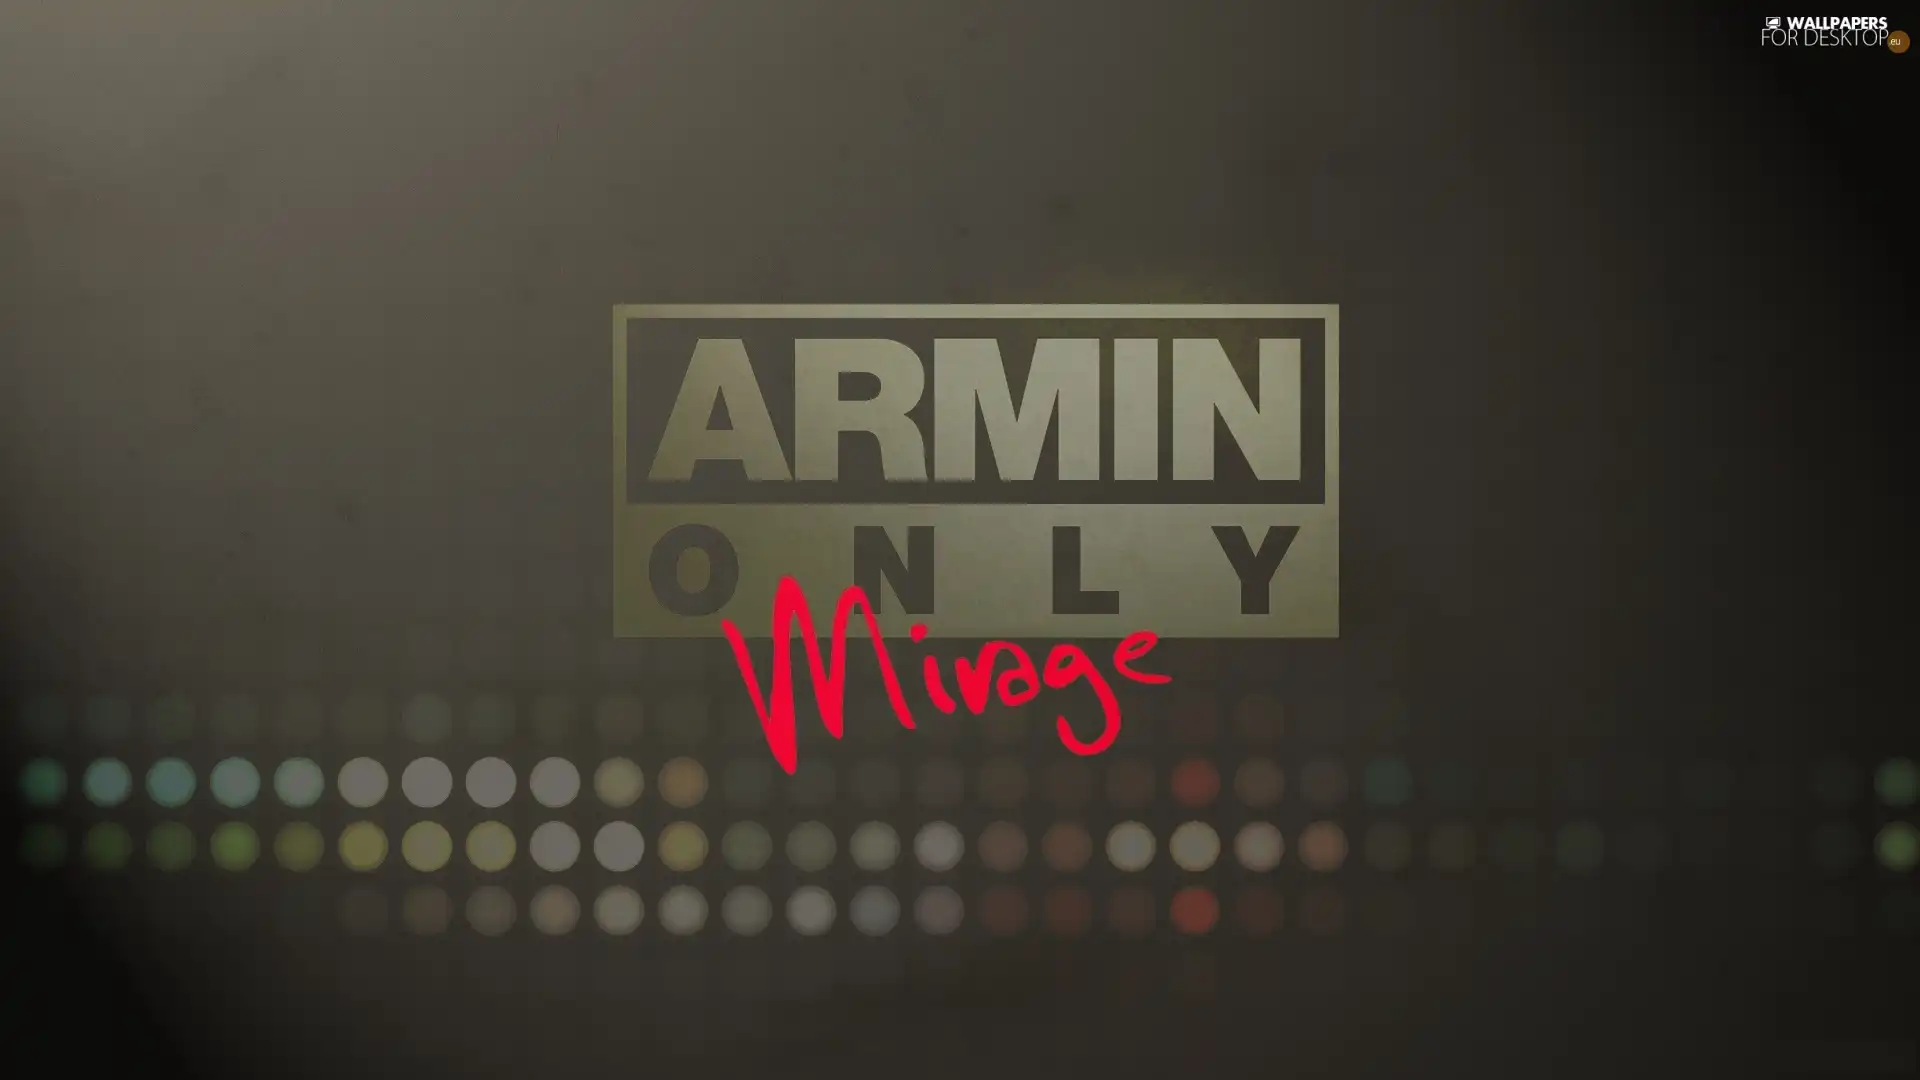 Mirage, Armin, Only